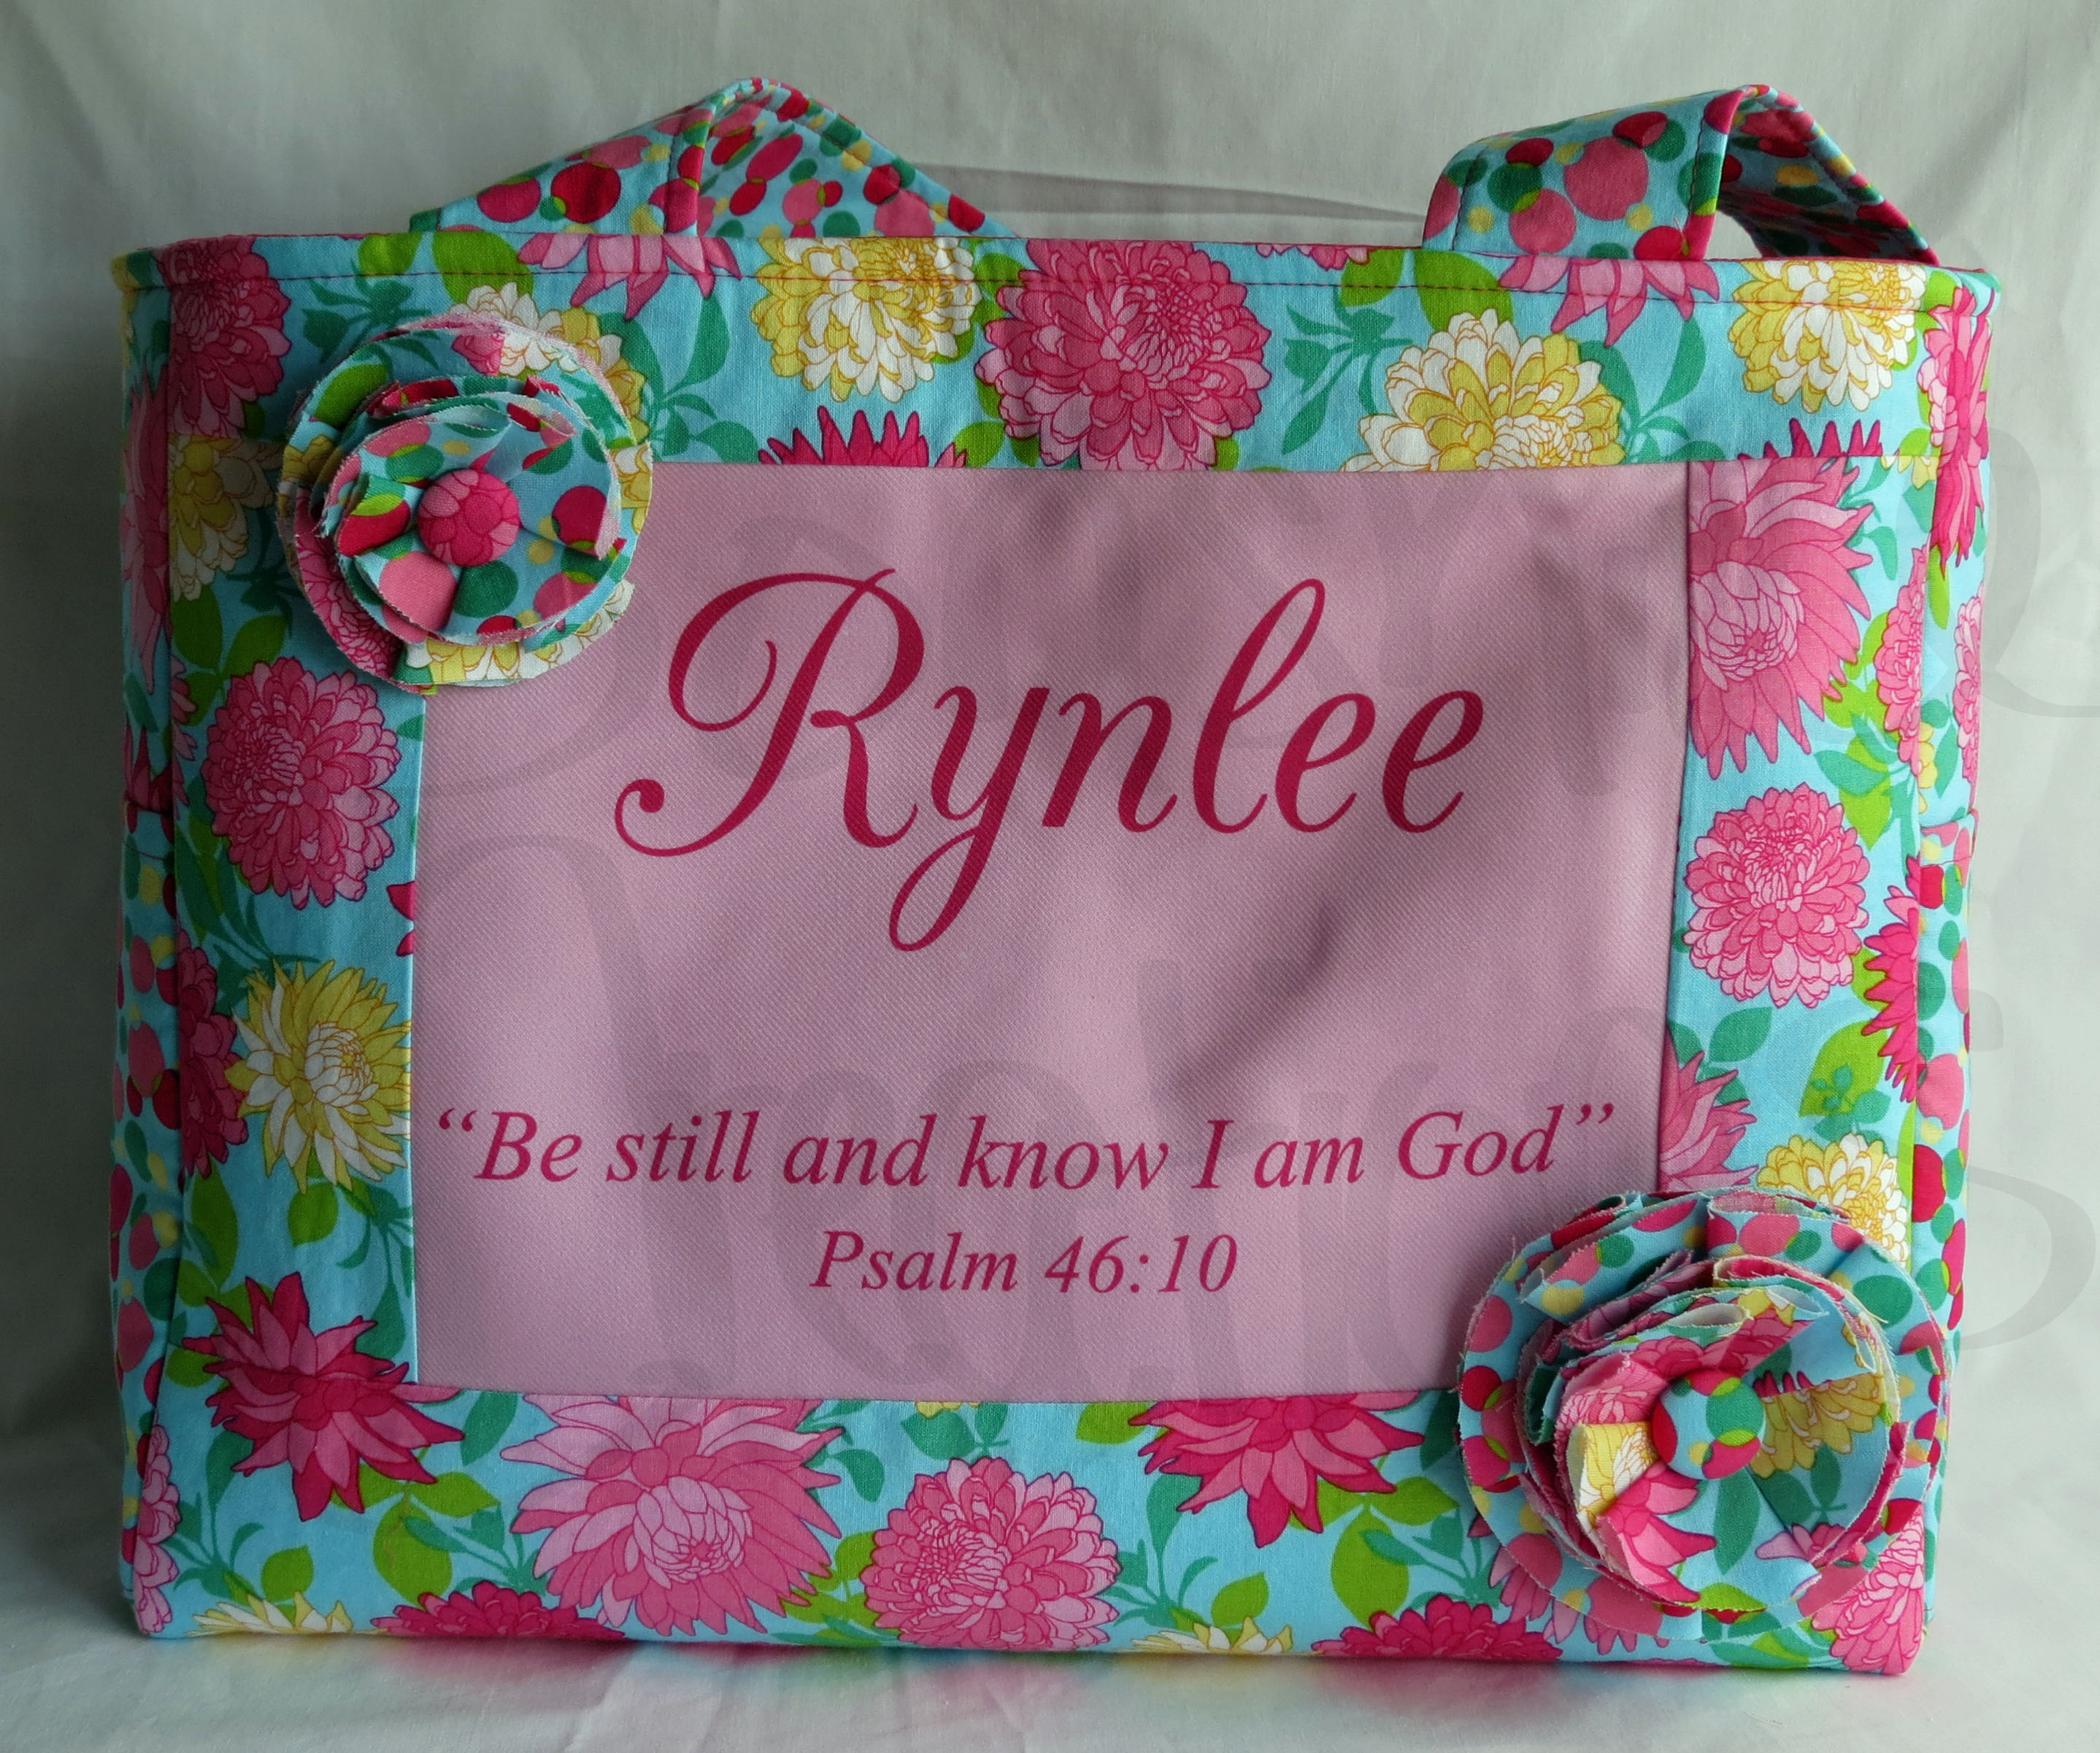 Monogrammed Diaper Bag made with sublimation printing